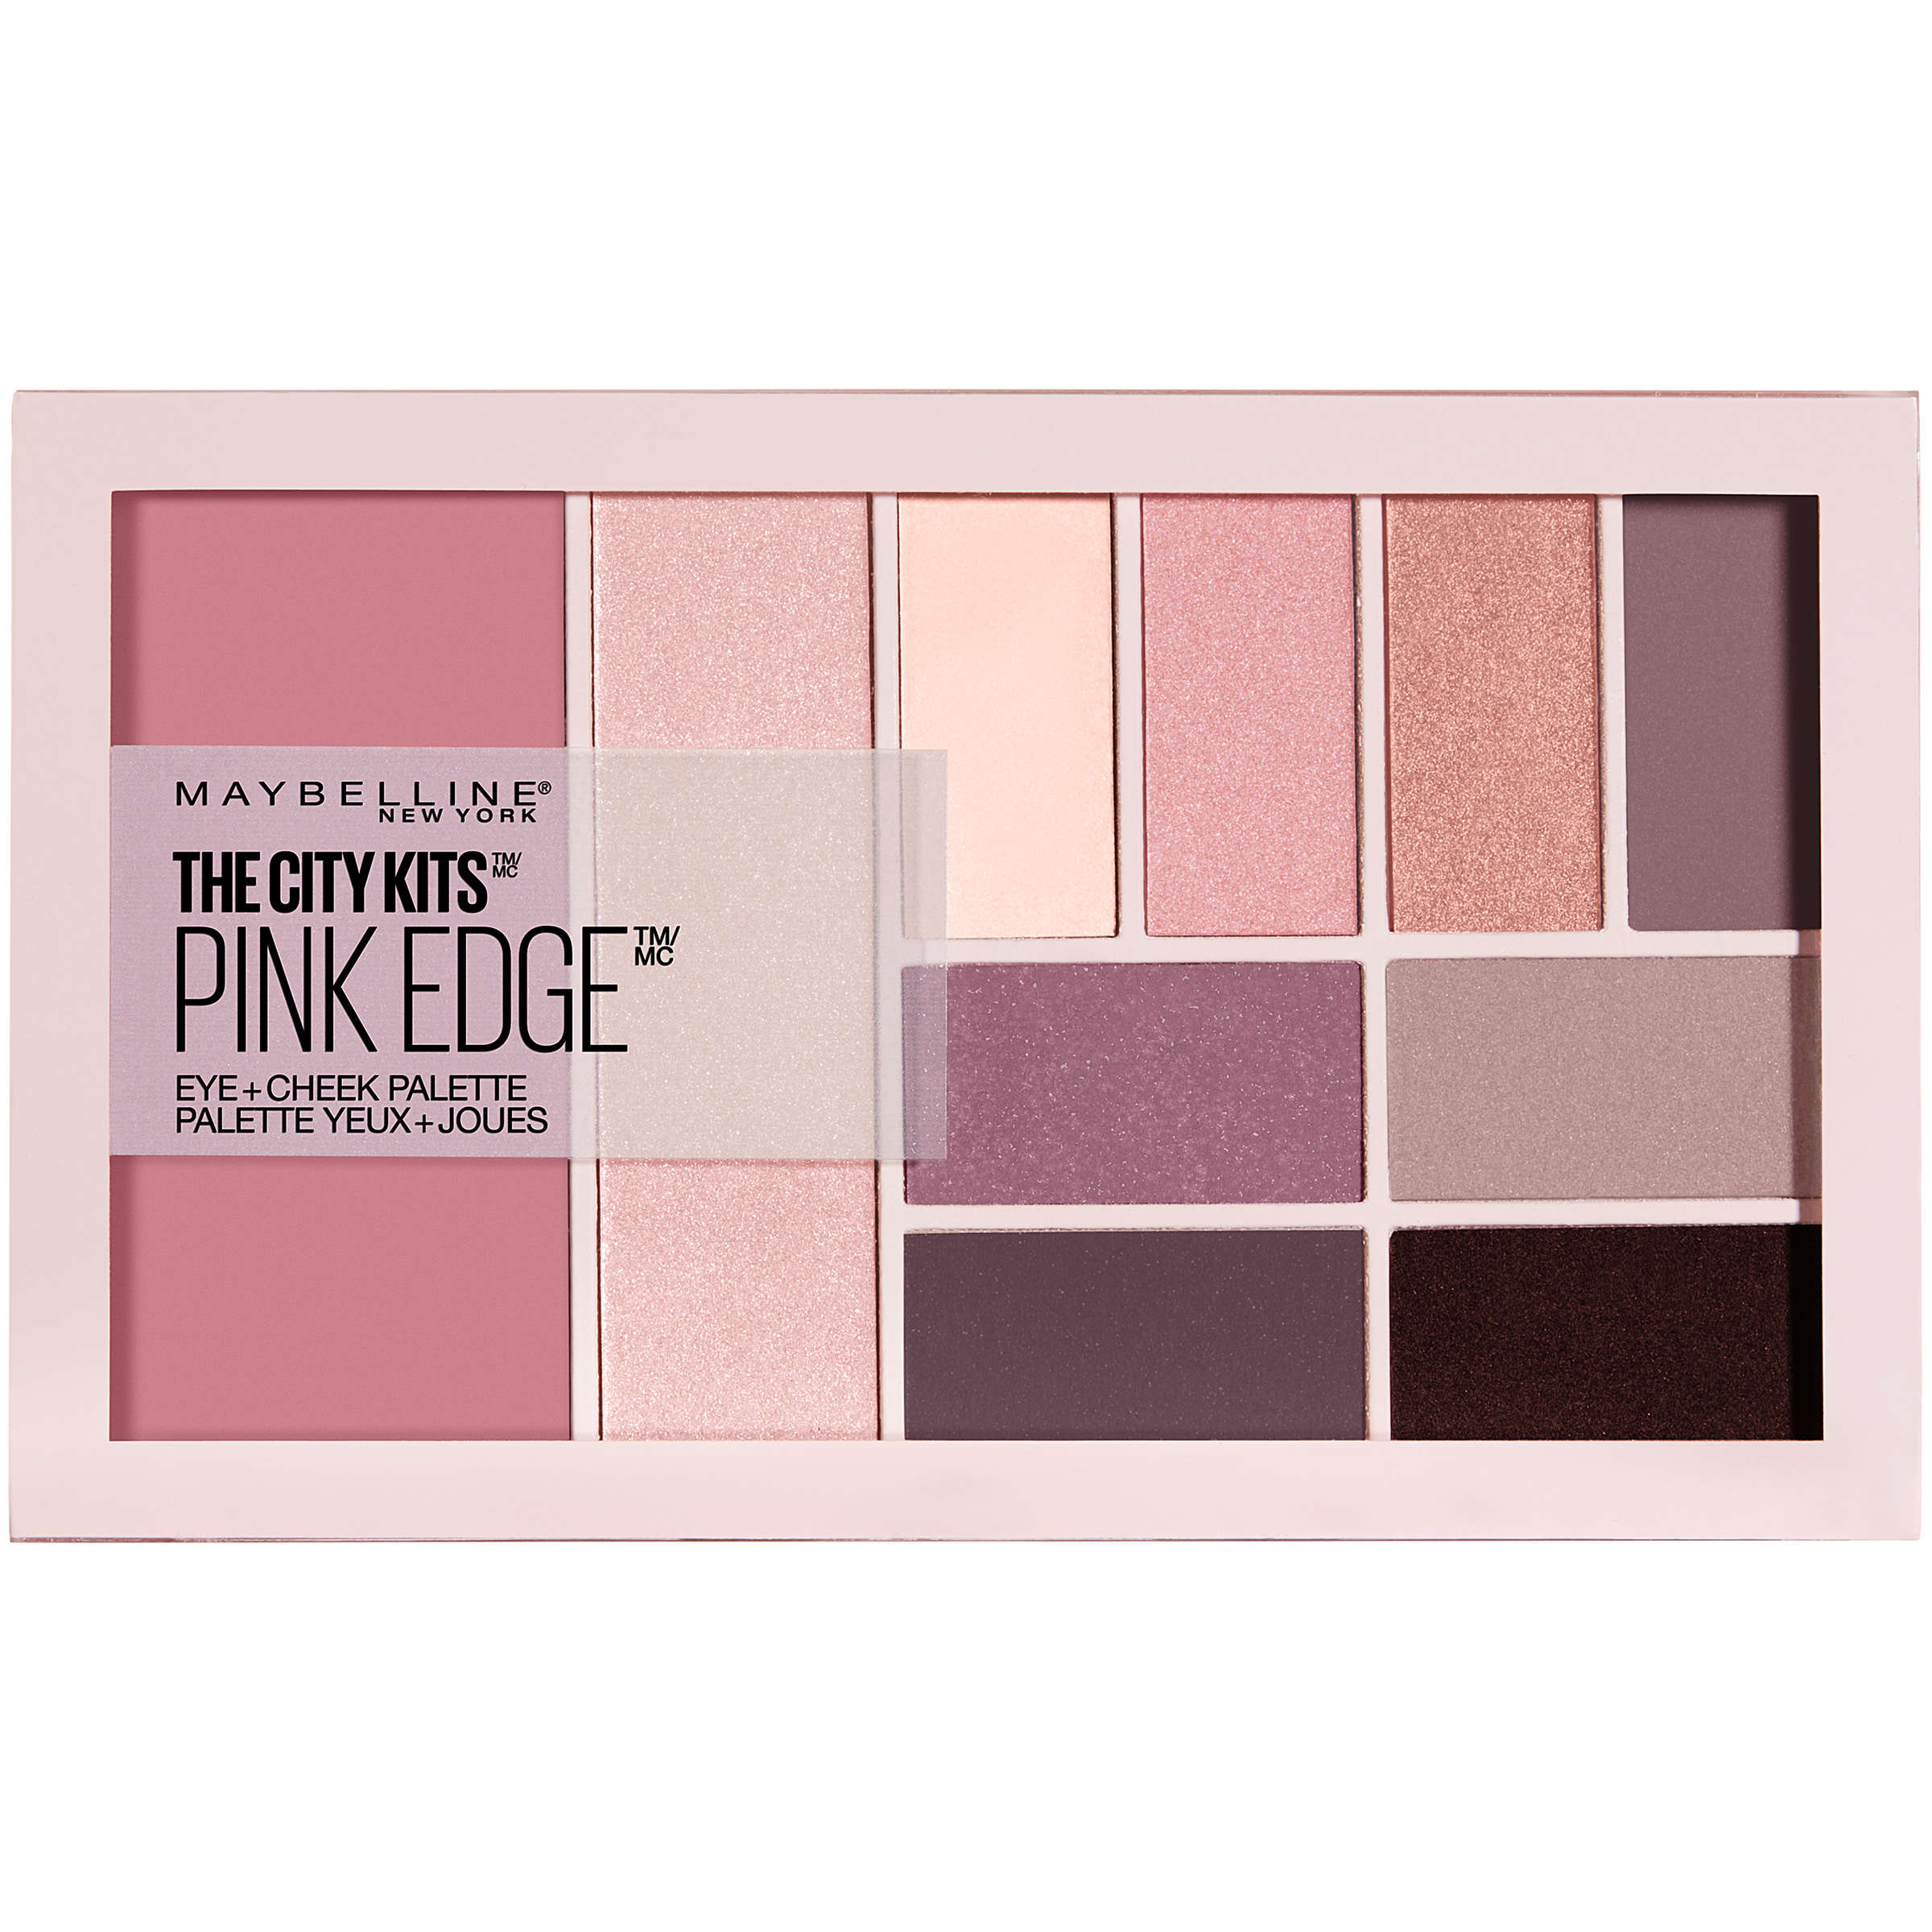 Maybelline The City Kits All In One Eye and Cheek Palette, Pink Edge - image 1 of 3